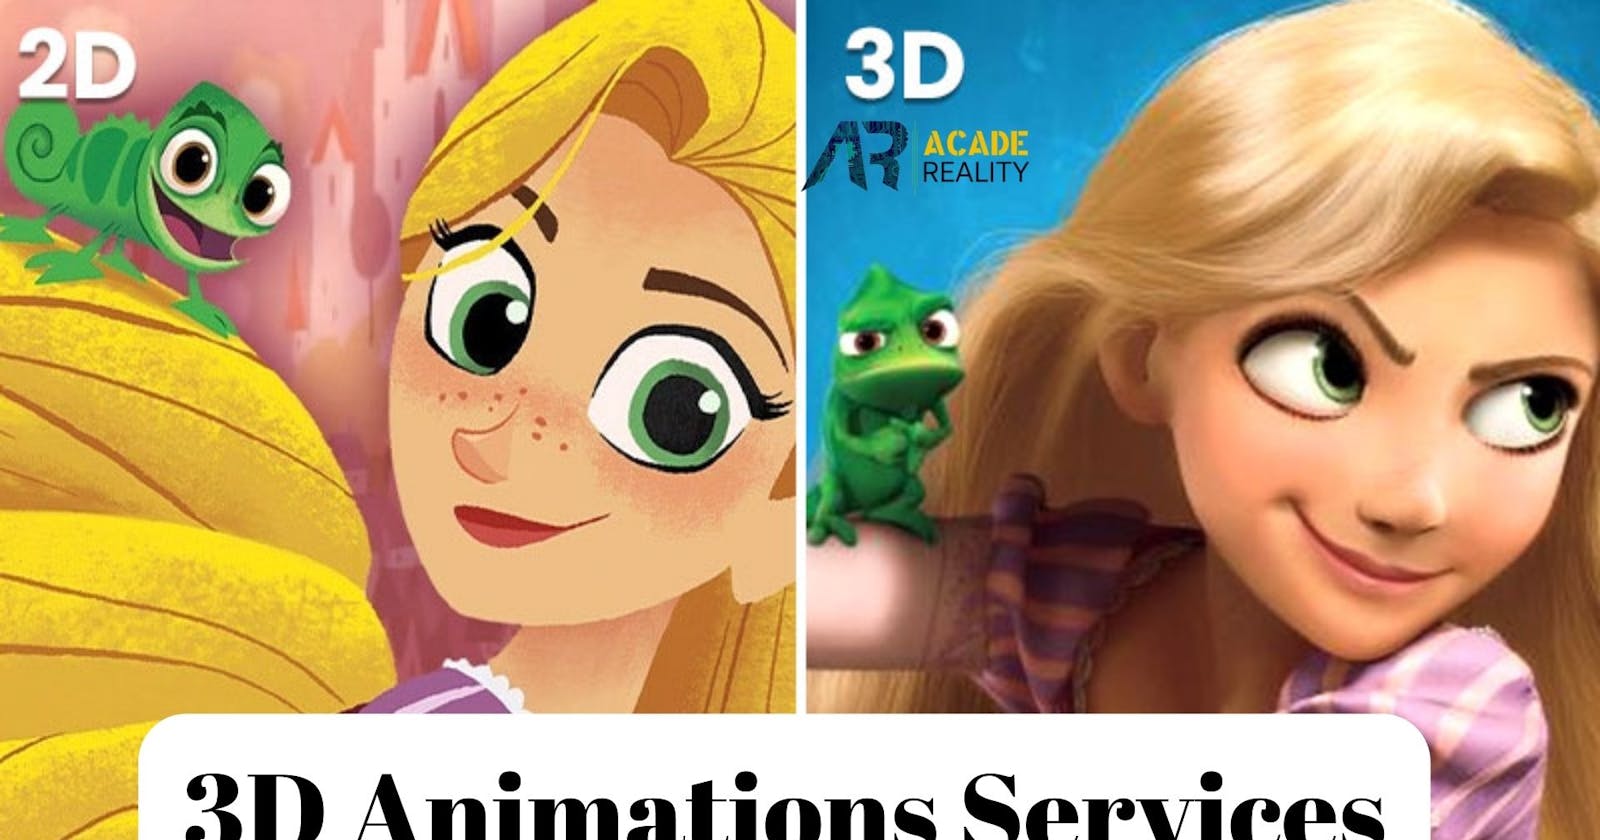 An introduction to 3D animation services